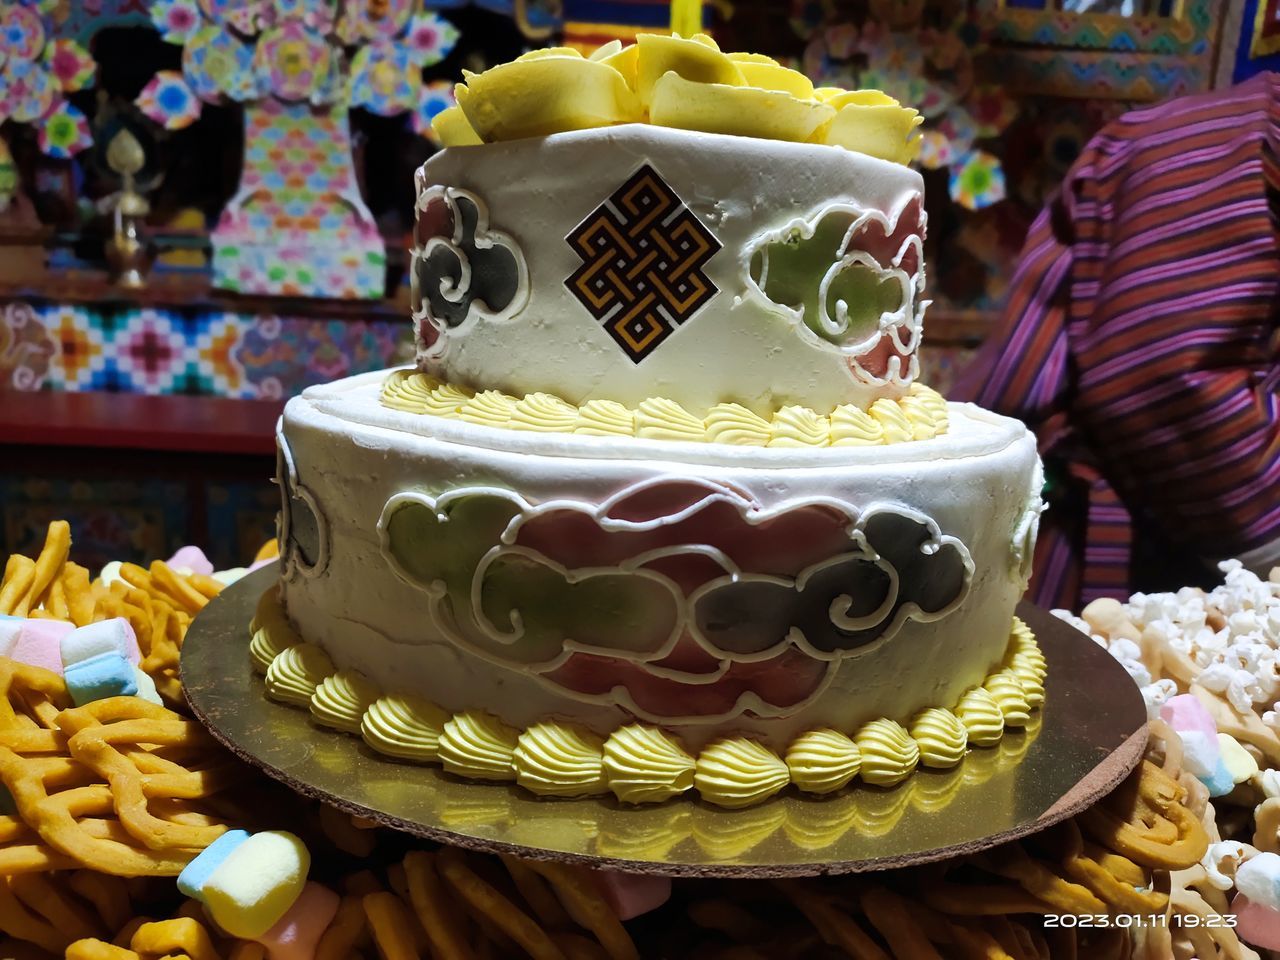 food, birthday cake, dessert, sweet food, sweet, food and drink, cake, icing, wedding cake, baked, celebration, religion, event, cake decorating, belief, tradition, yellow, no people, sweetness, indoors, focus on foreground